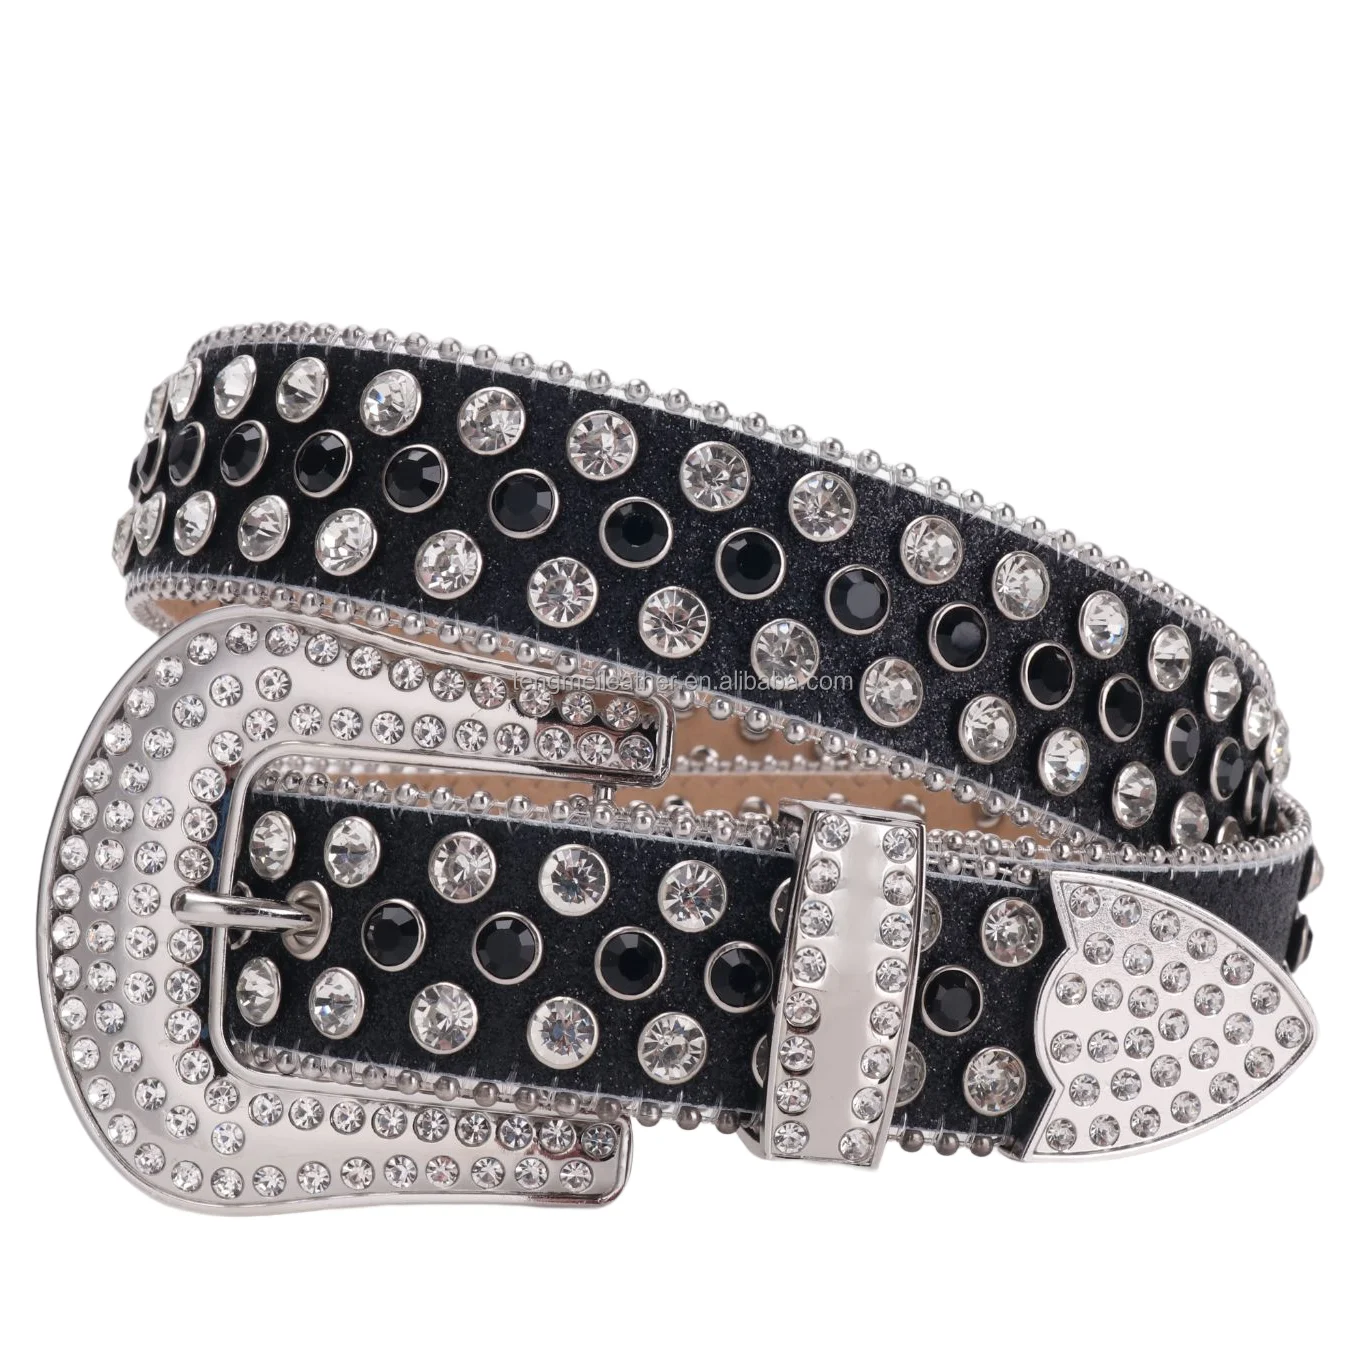 Blanc Classic Rhinestone Designer Belt For Men And Women Sparkling Diamond  Hip Hop Waistband With Multicolor Rhinsestones Black Base Perfect Gift  Factory Wholesale From Fashion960, $31.02